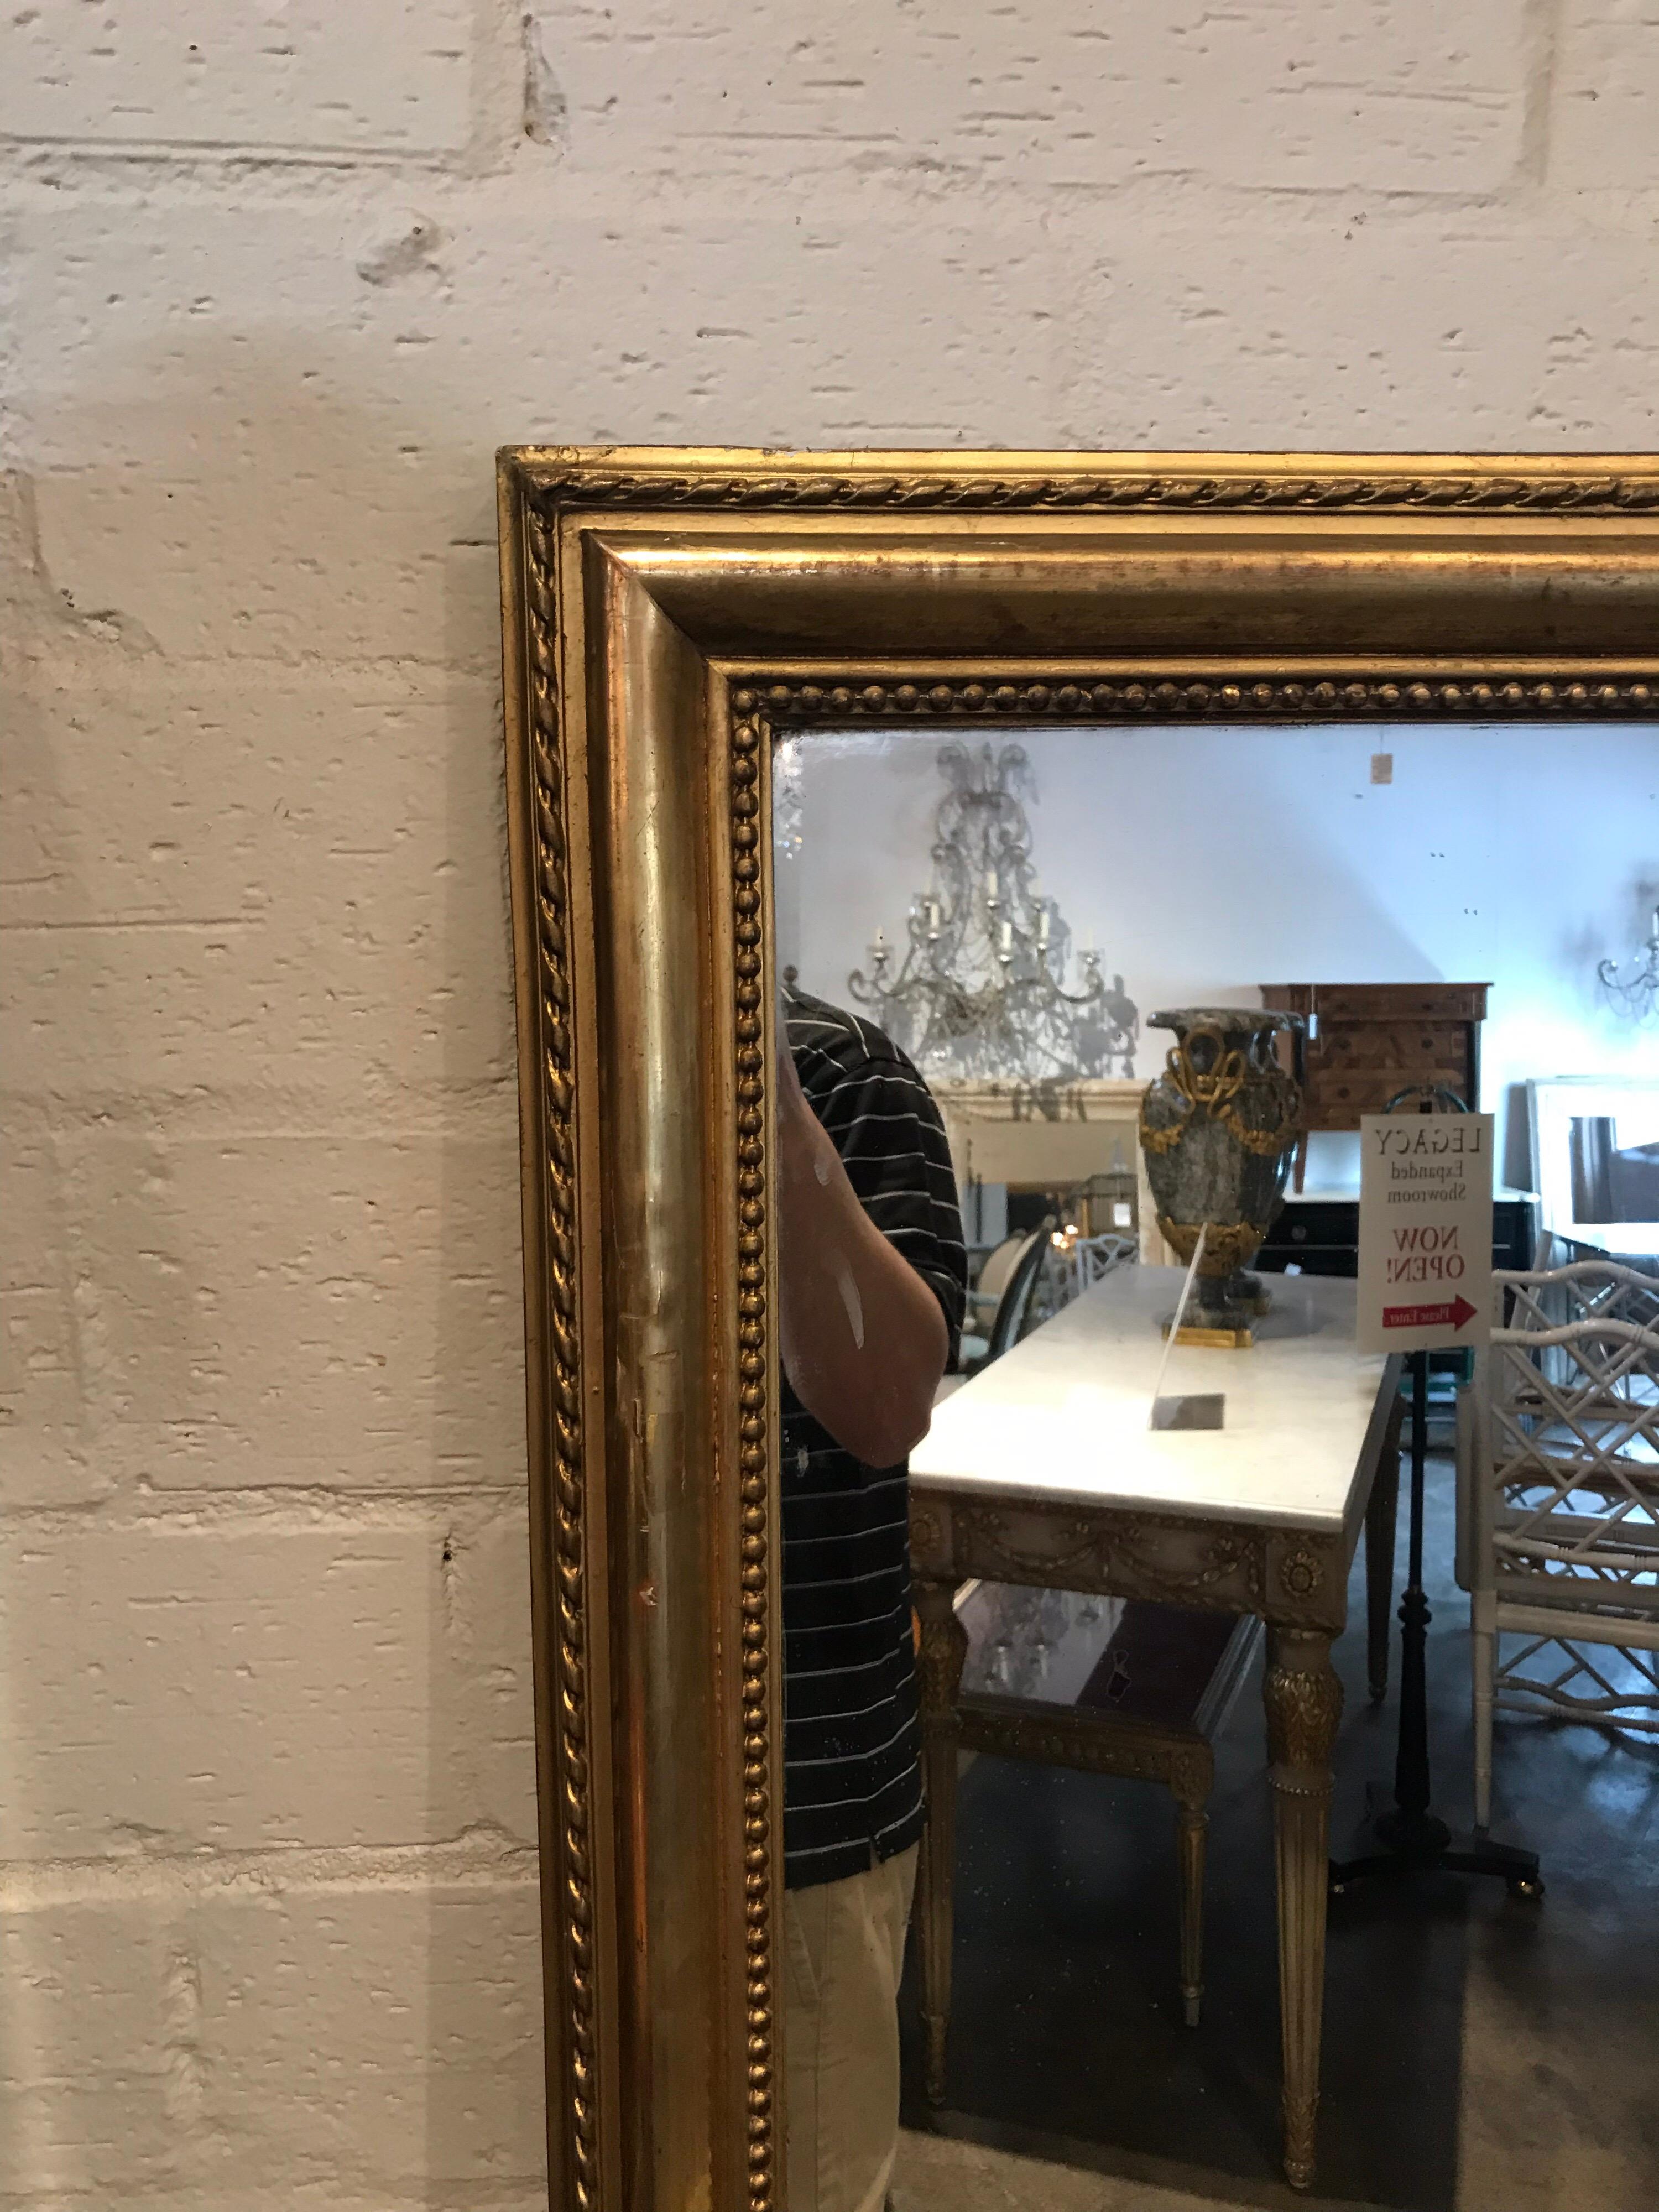 Very nice pair of French Directoire' giltwood mirrors. An excellent addition to a living room or dining room. Sold separately.